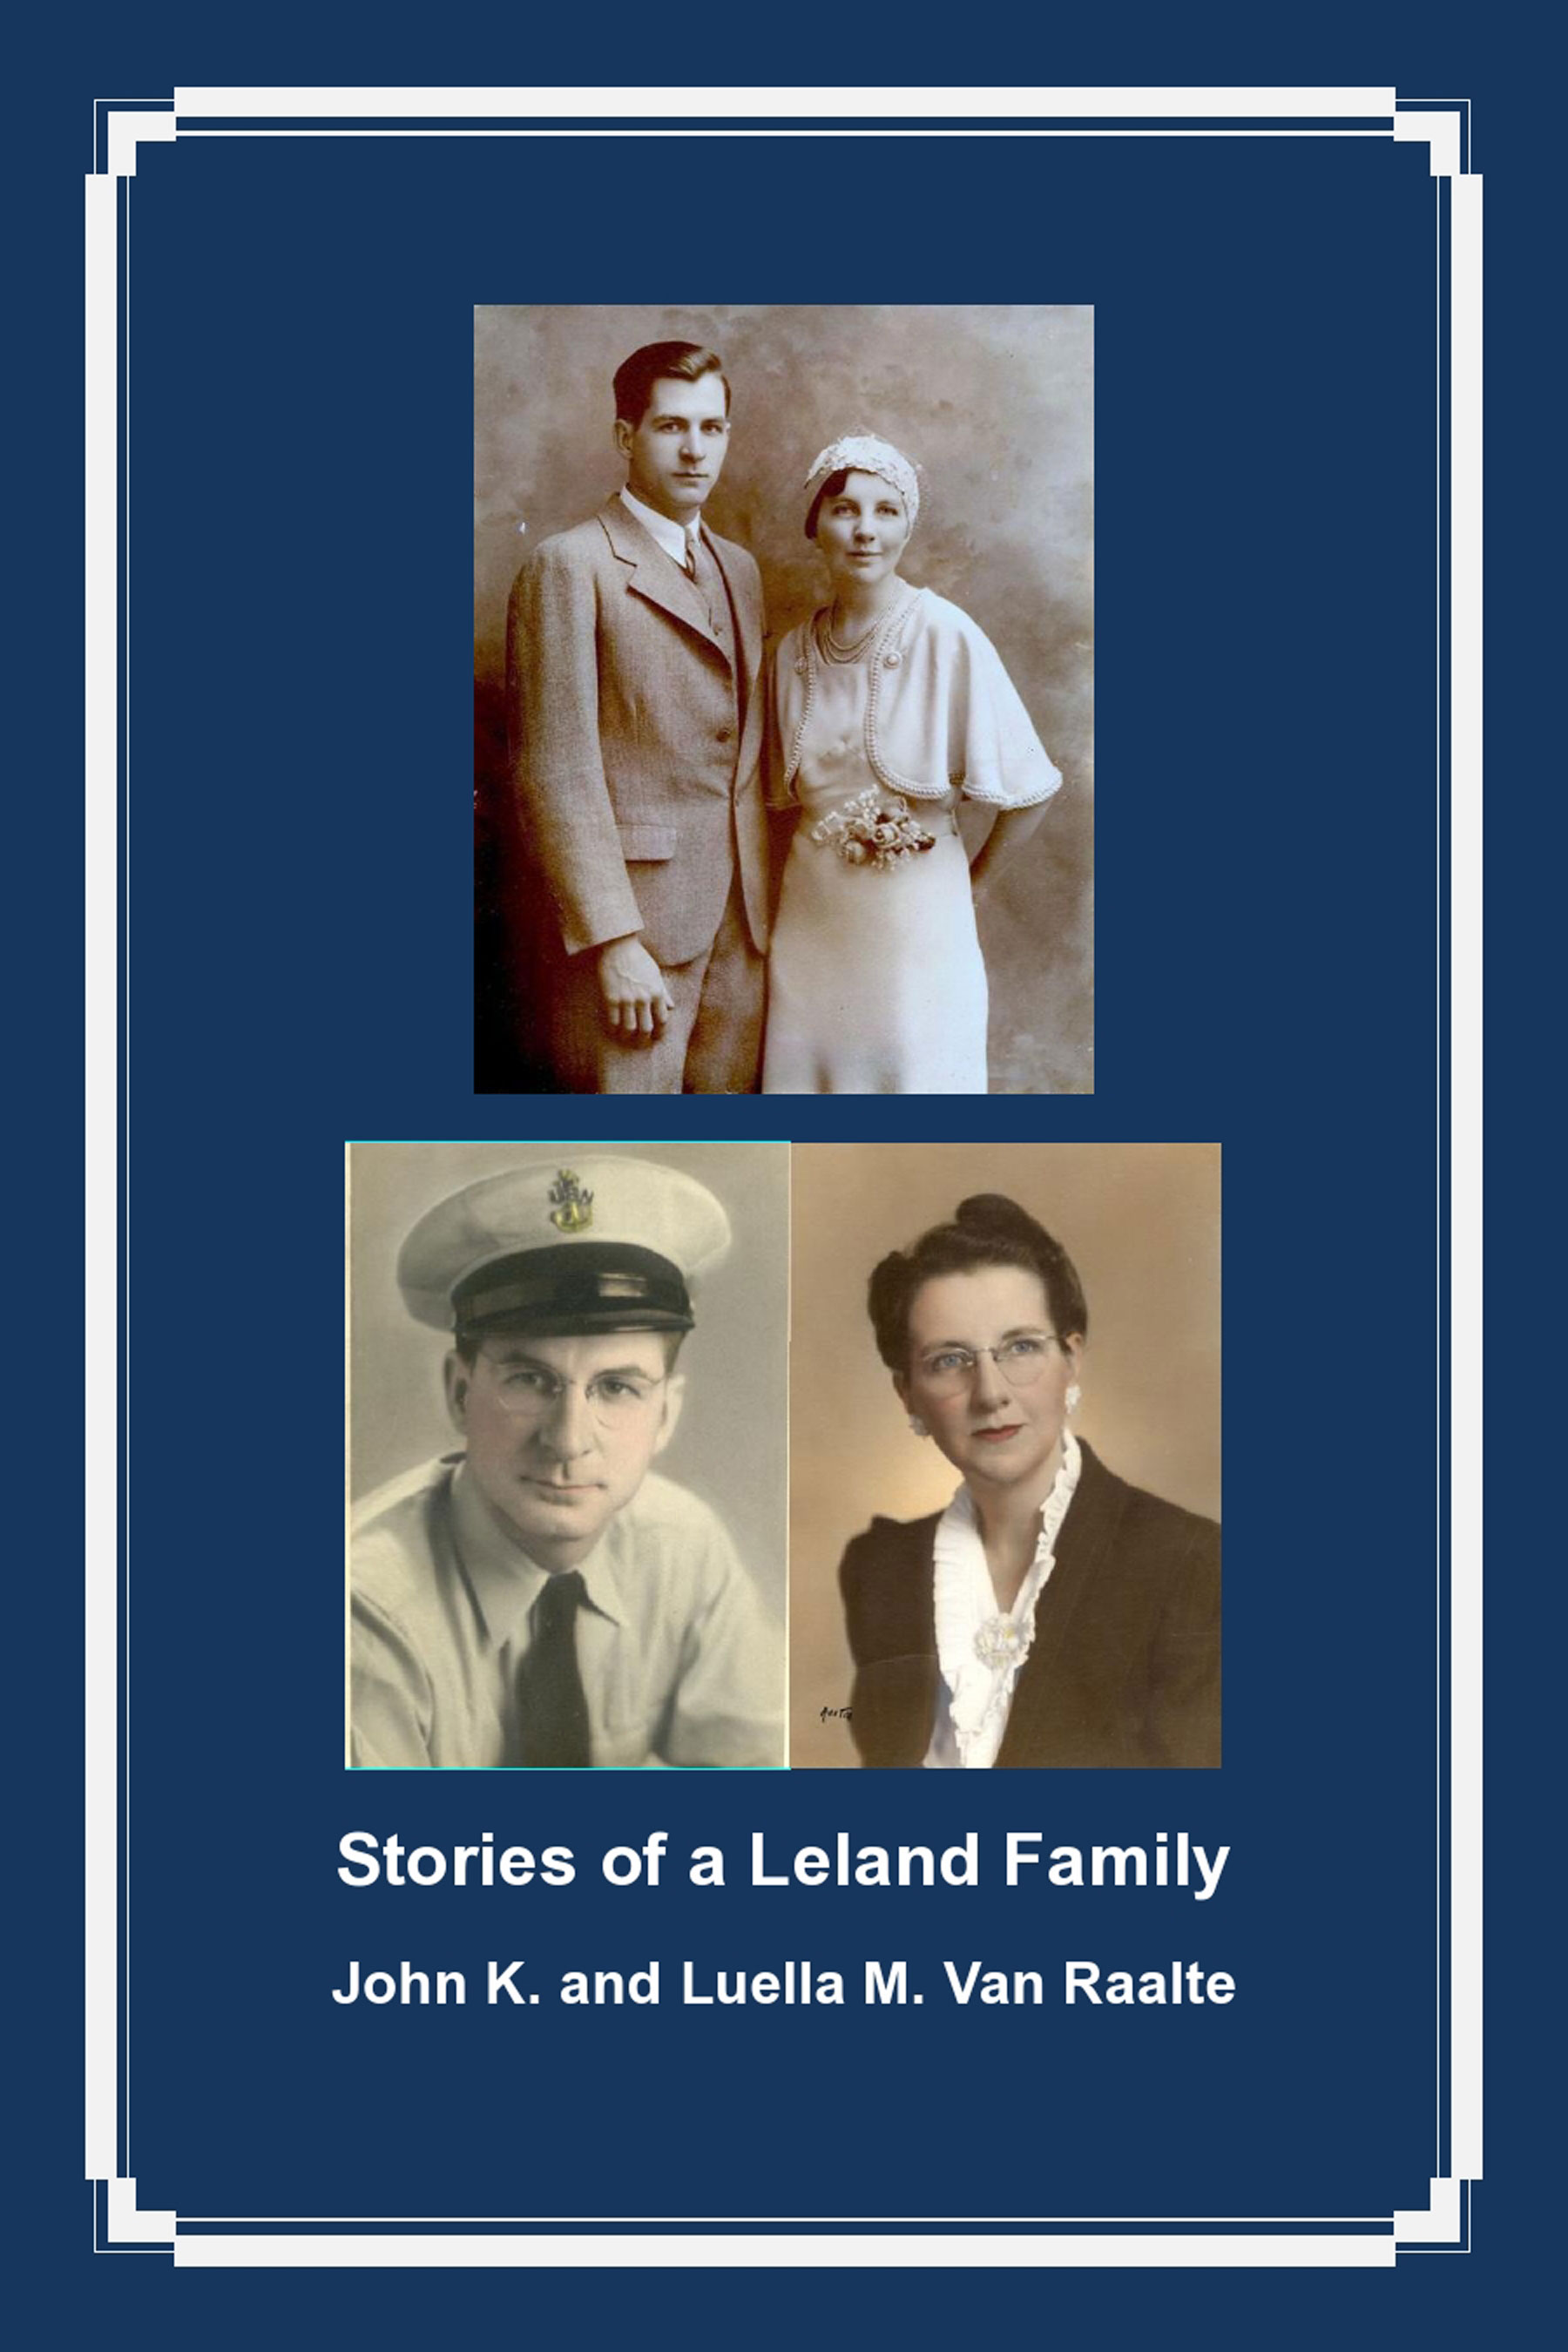 Photo of front cover of Stories of a Leland Family